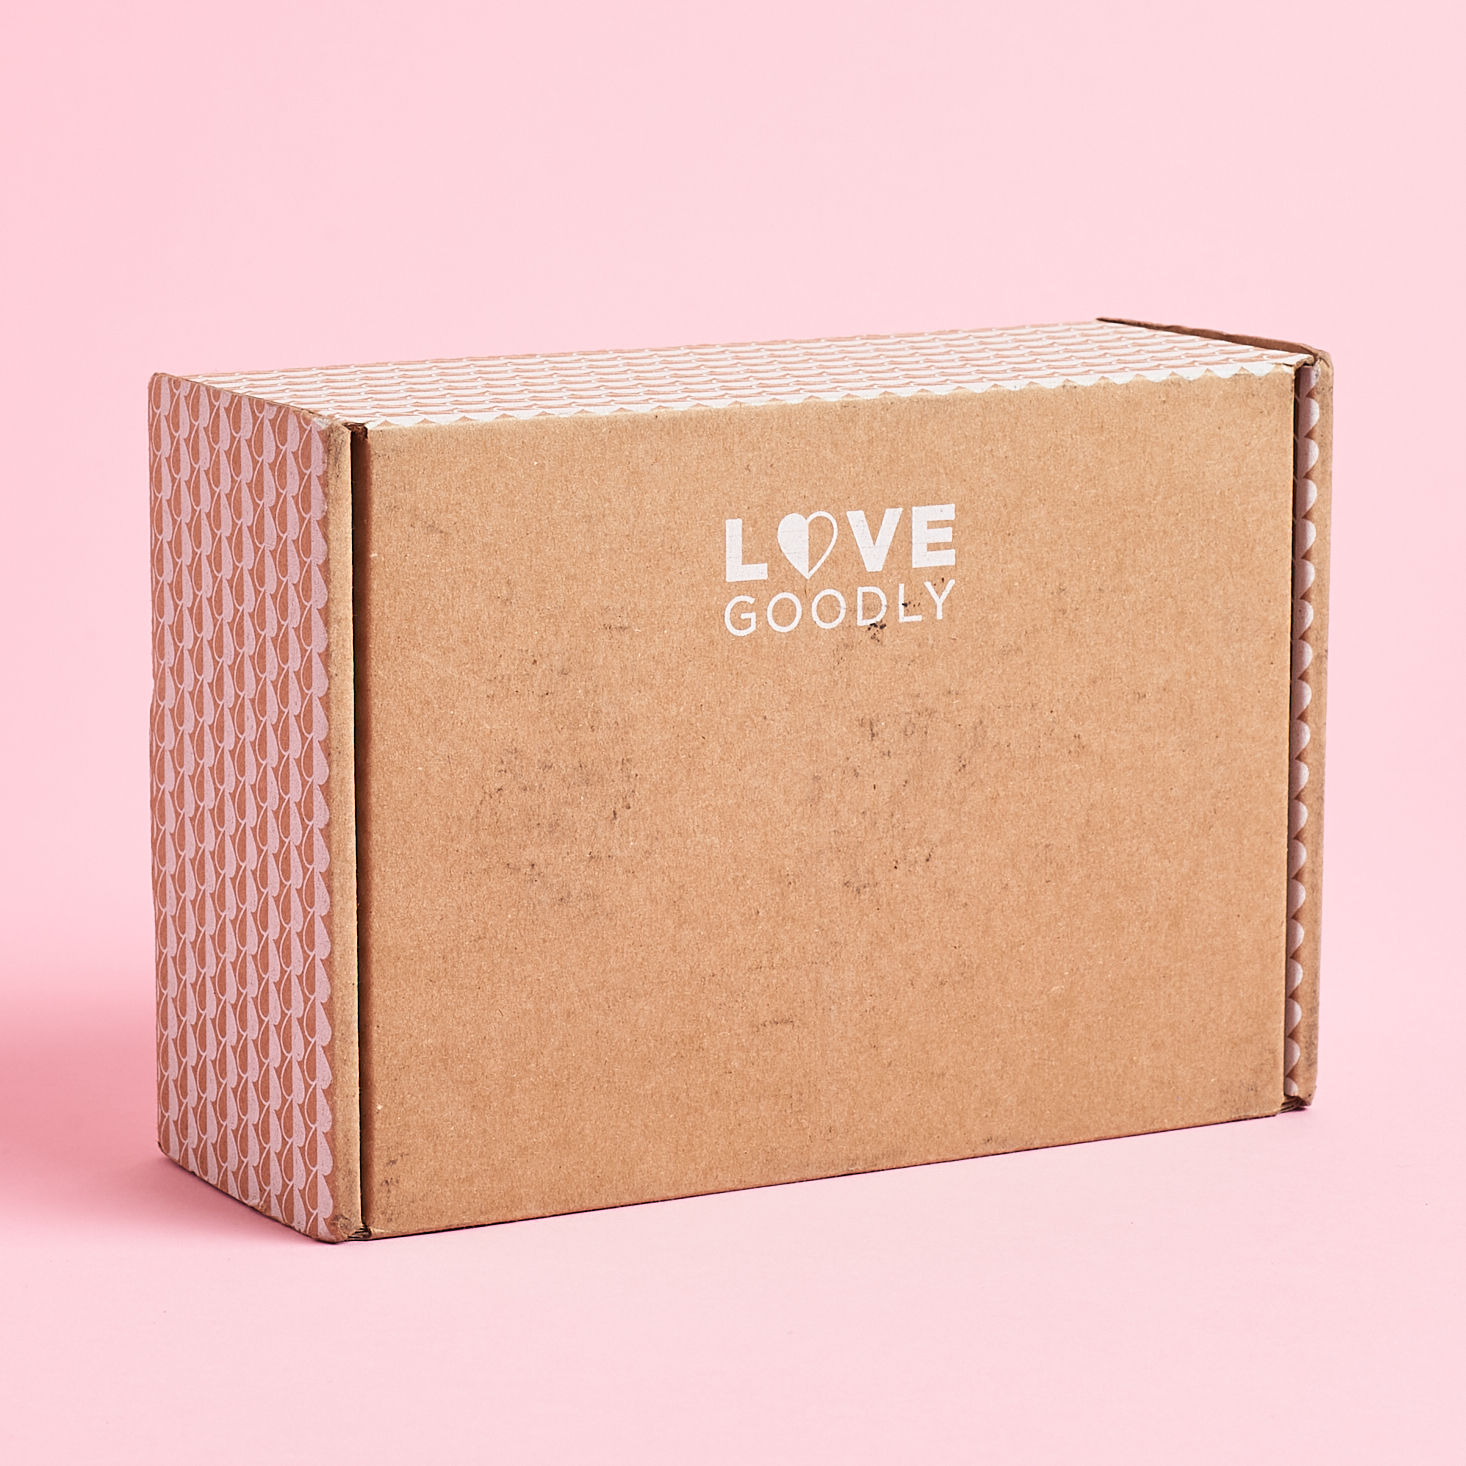 Love Goodly VIP Box Review + Coupon – December 2020/January 2021